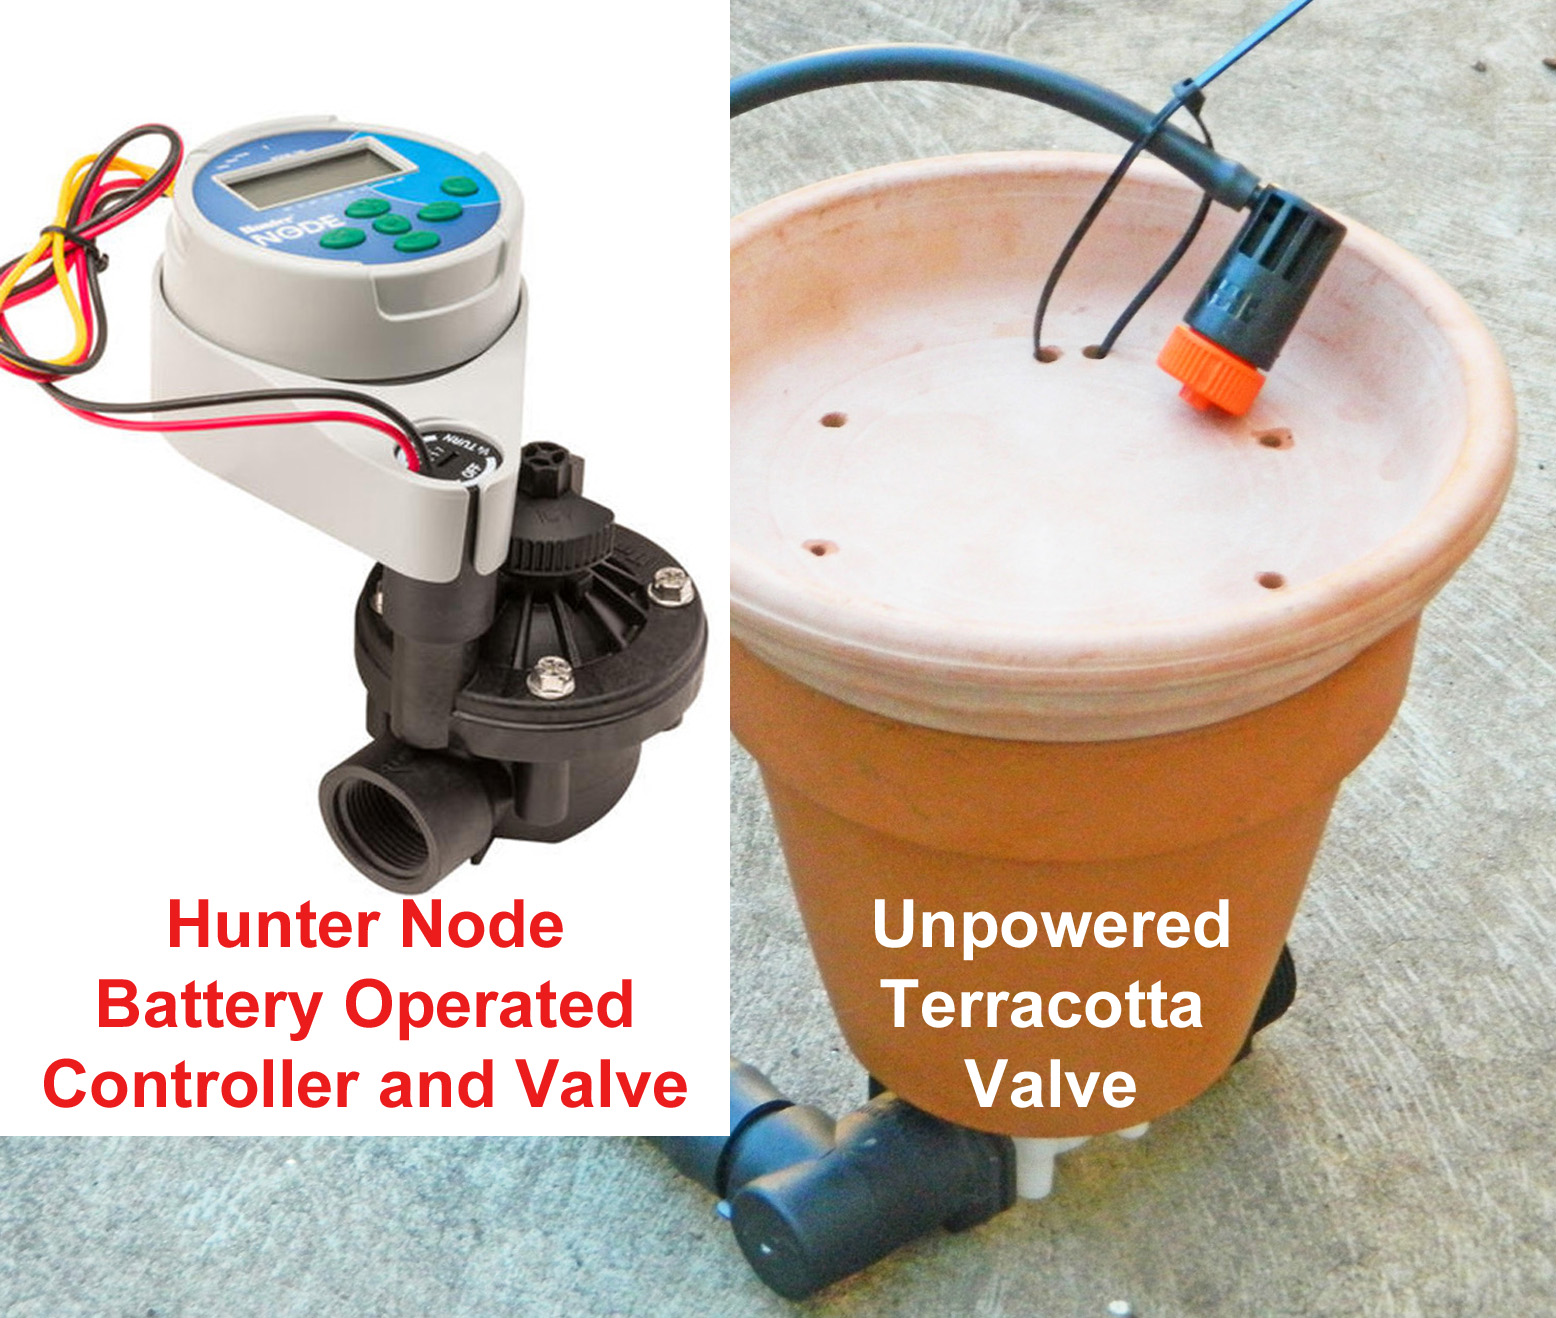 Comparison between Unpowered Terracotta Valve and Hunter Node Battery Operated Controller with rain sensorUnpowered Terracotta Valve / Hunter No...